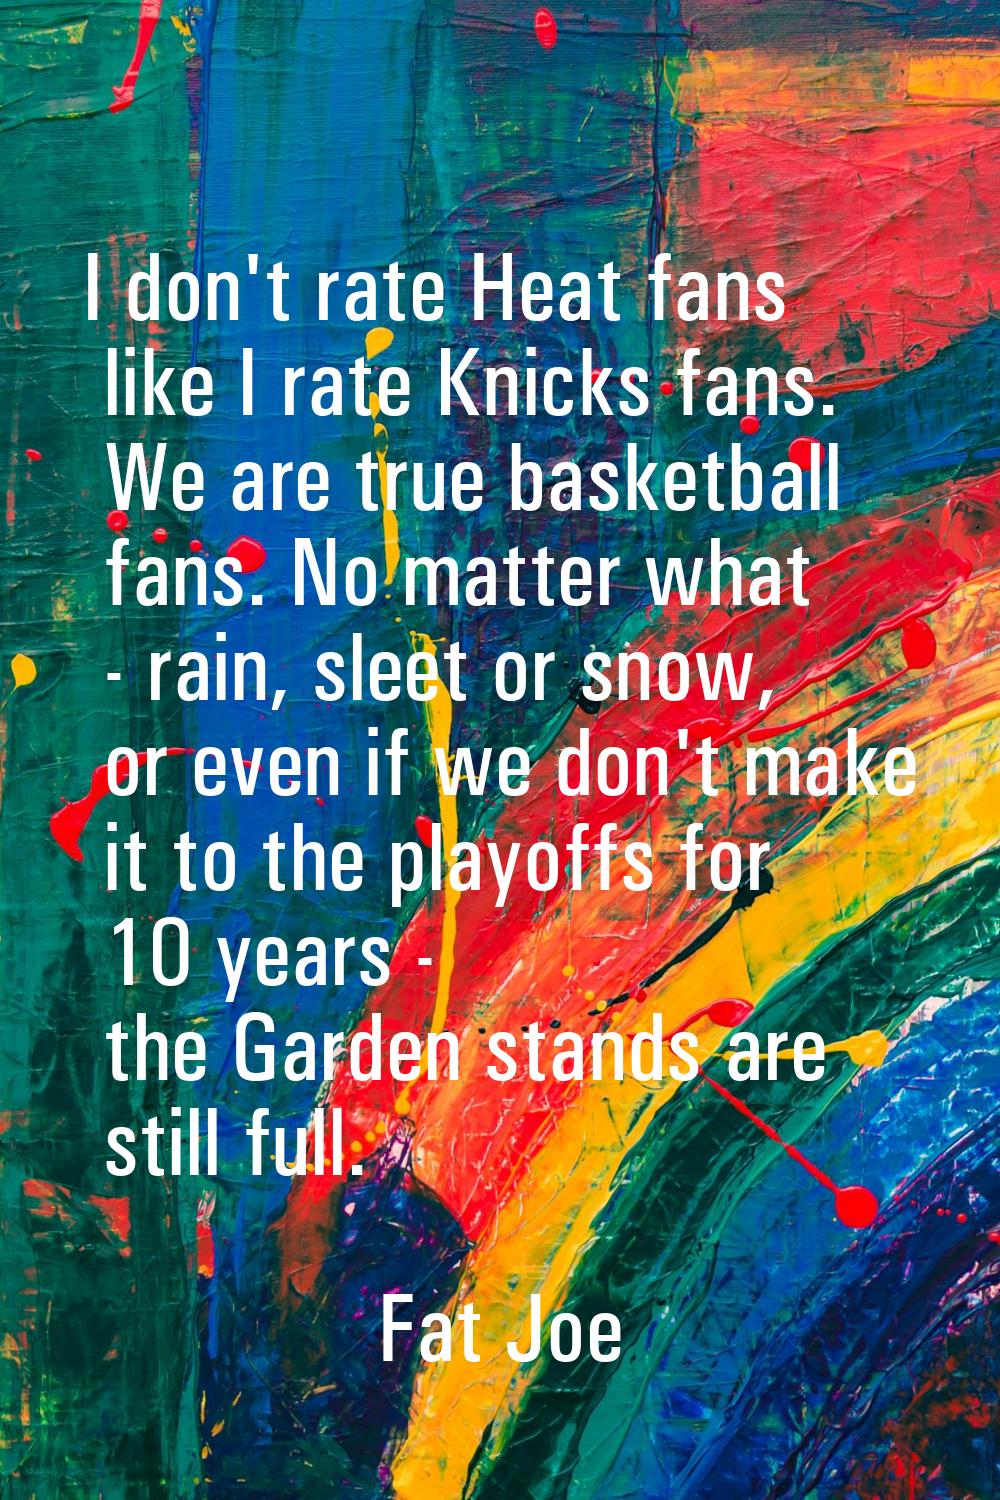 I don't rate Heat fans like I rate Knicks fans. We are true basketball fans. No matter what - rain,